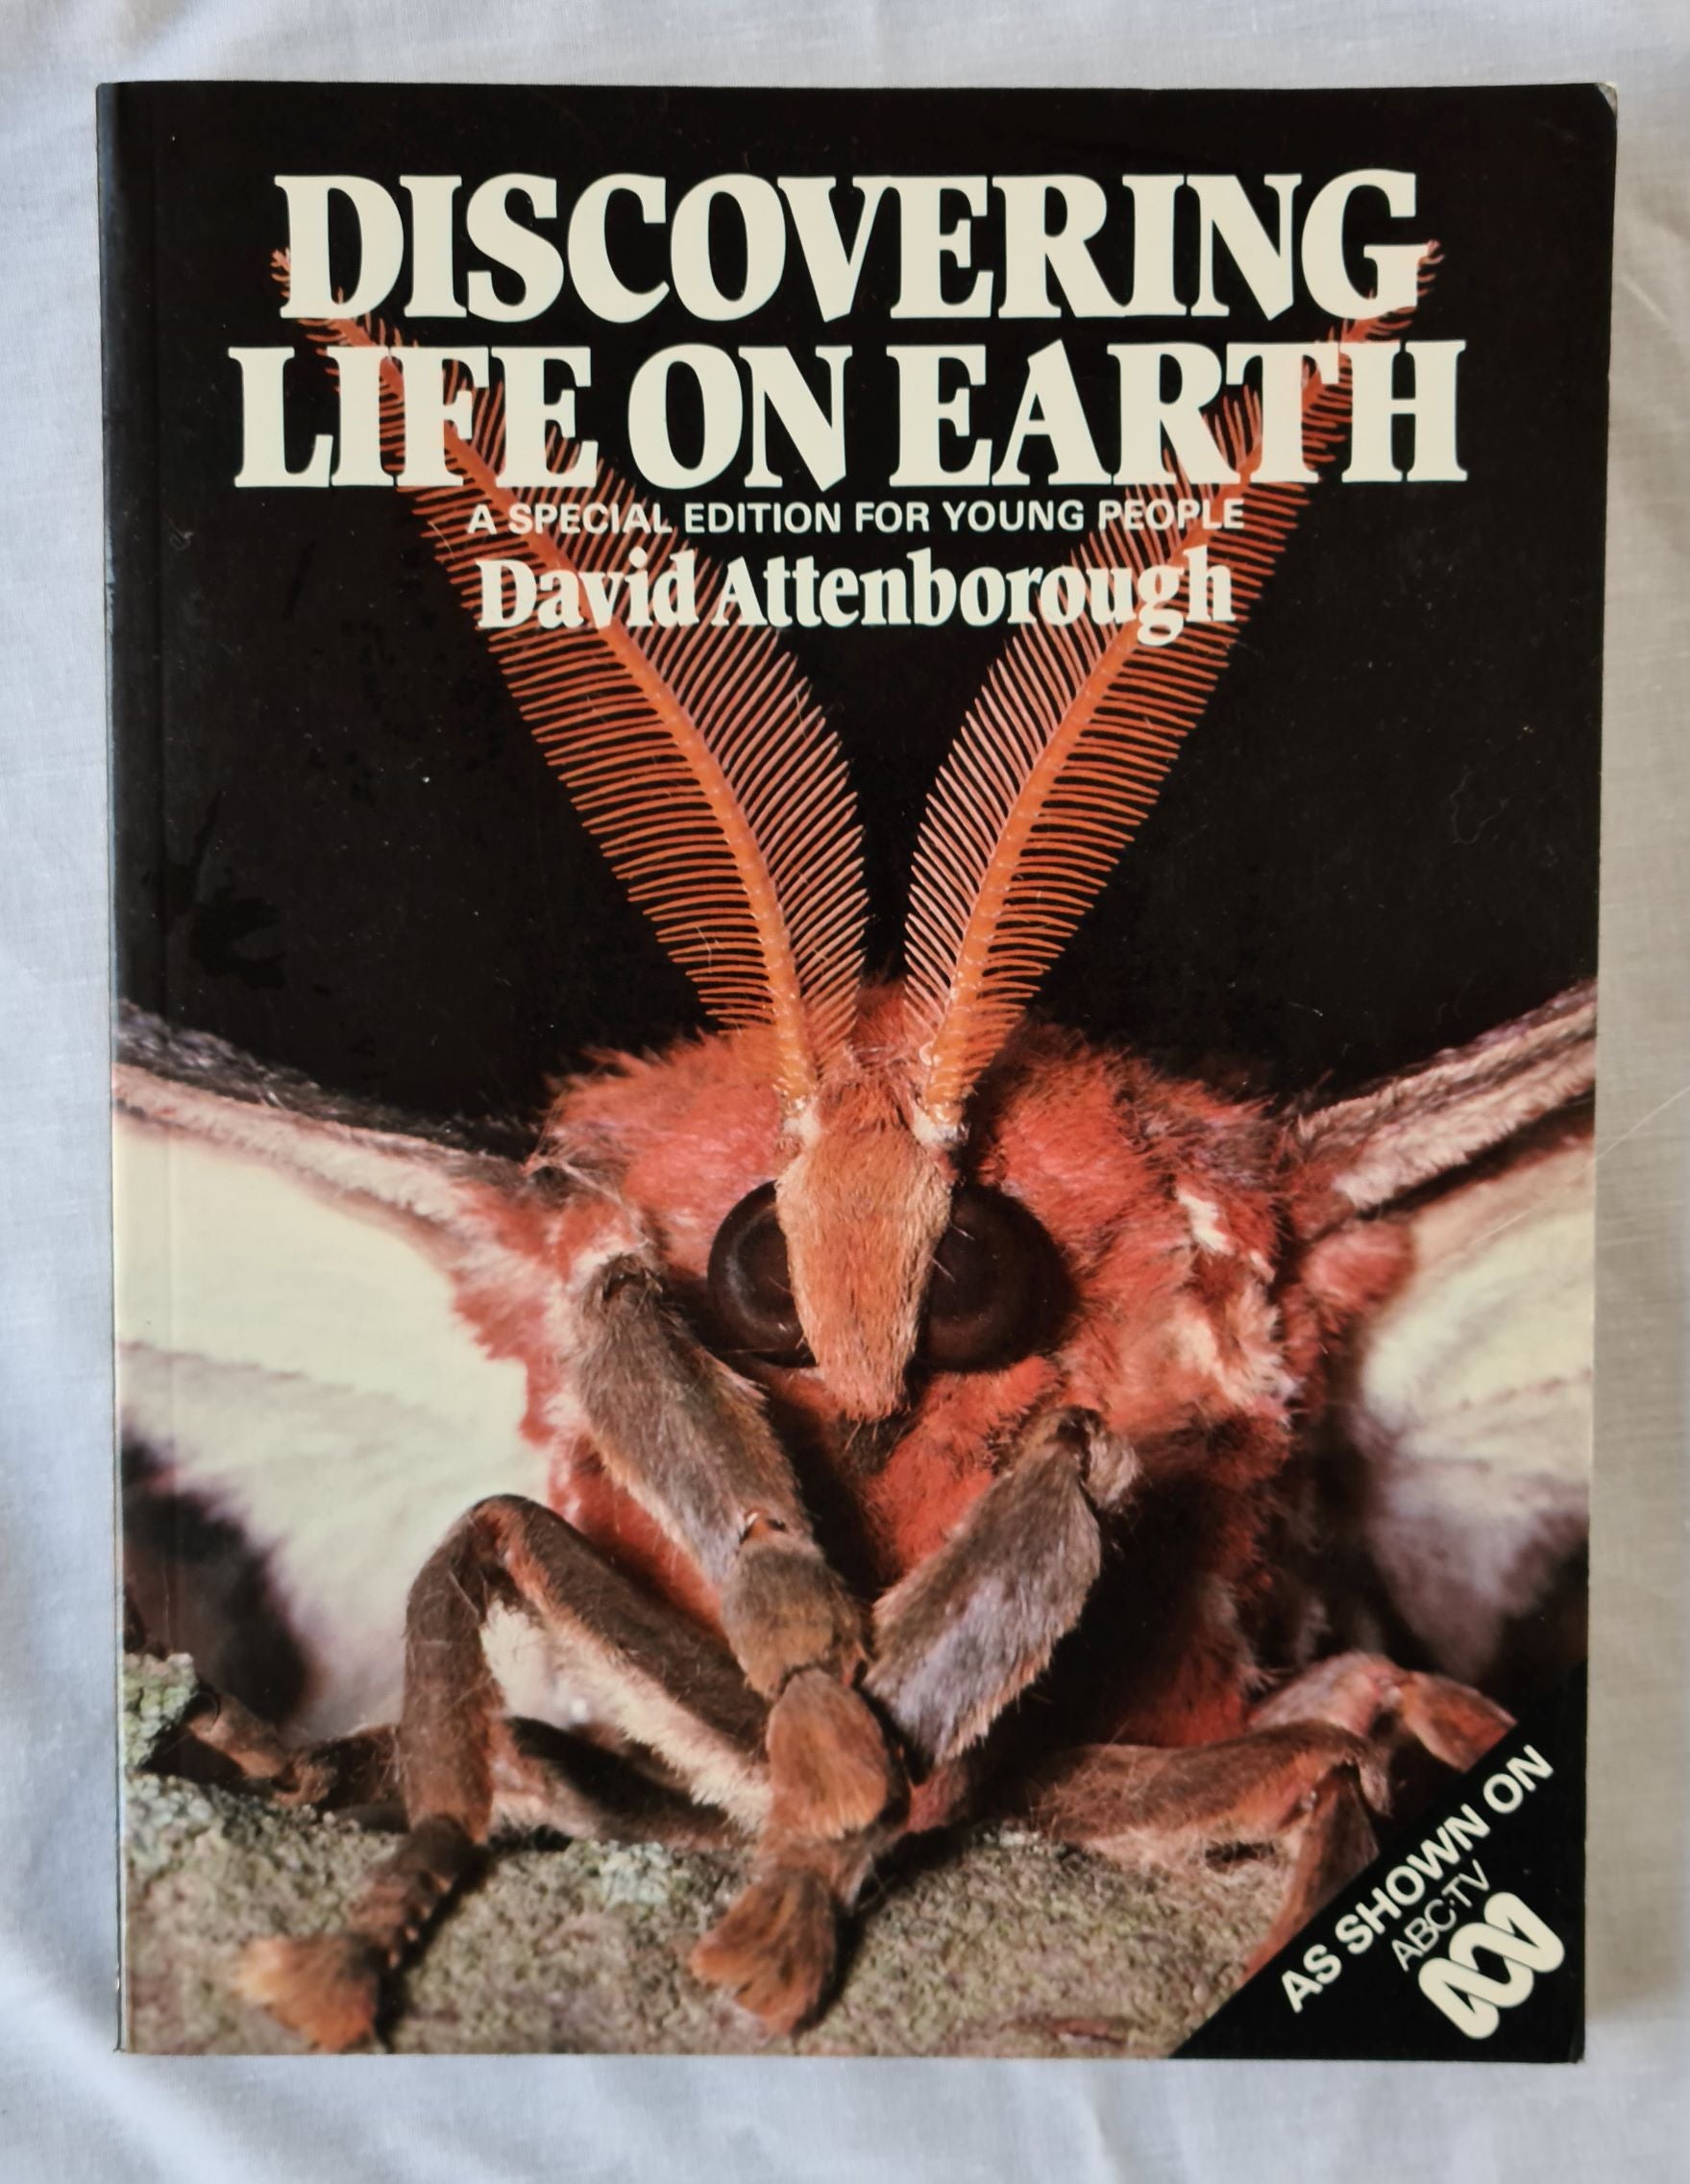 Discovering Life on Earth by David Attenborough